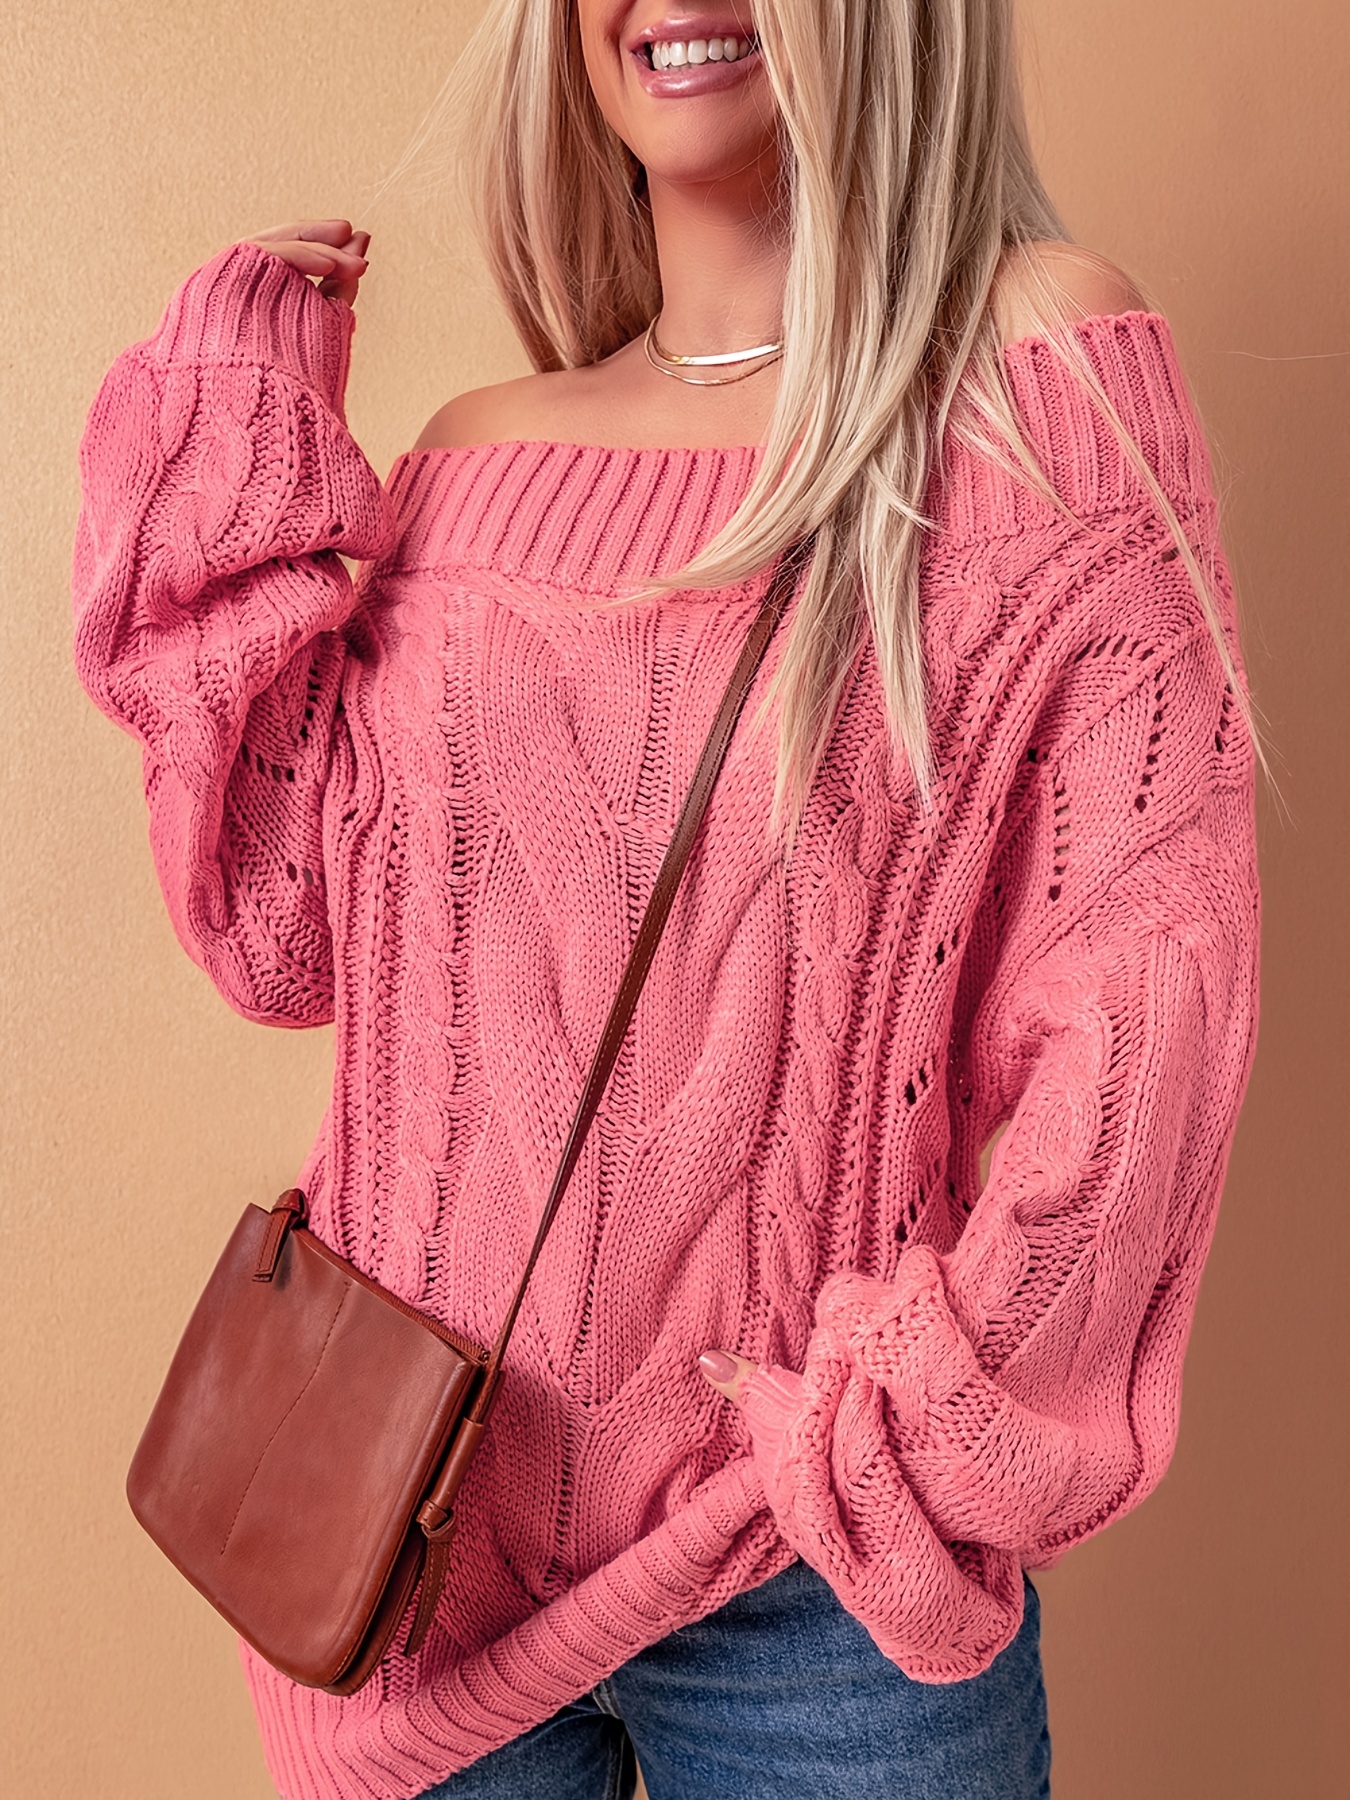 Sexy Shoulder Oversized Sweater Casual Crew Neck Long Sleeve